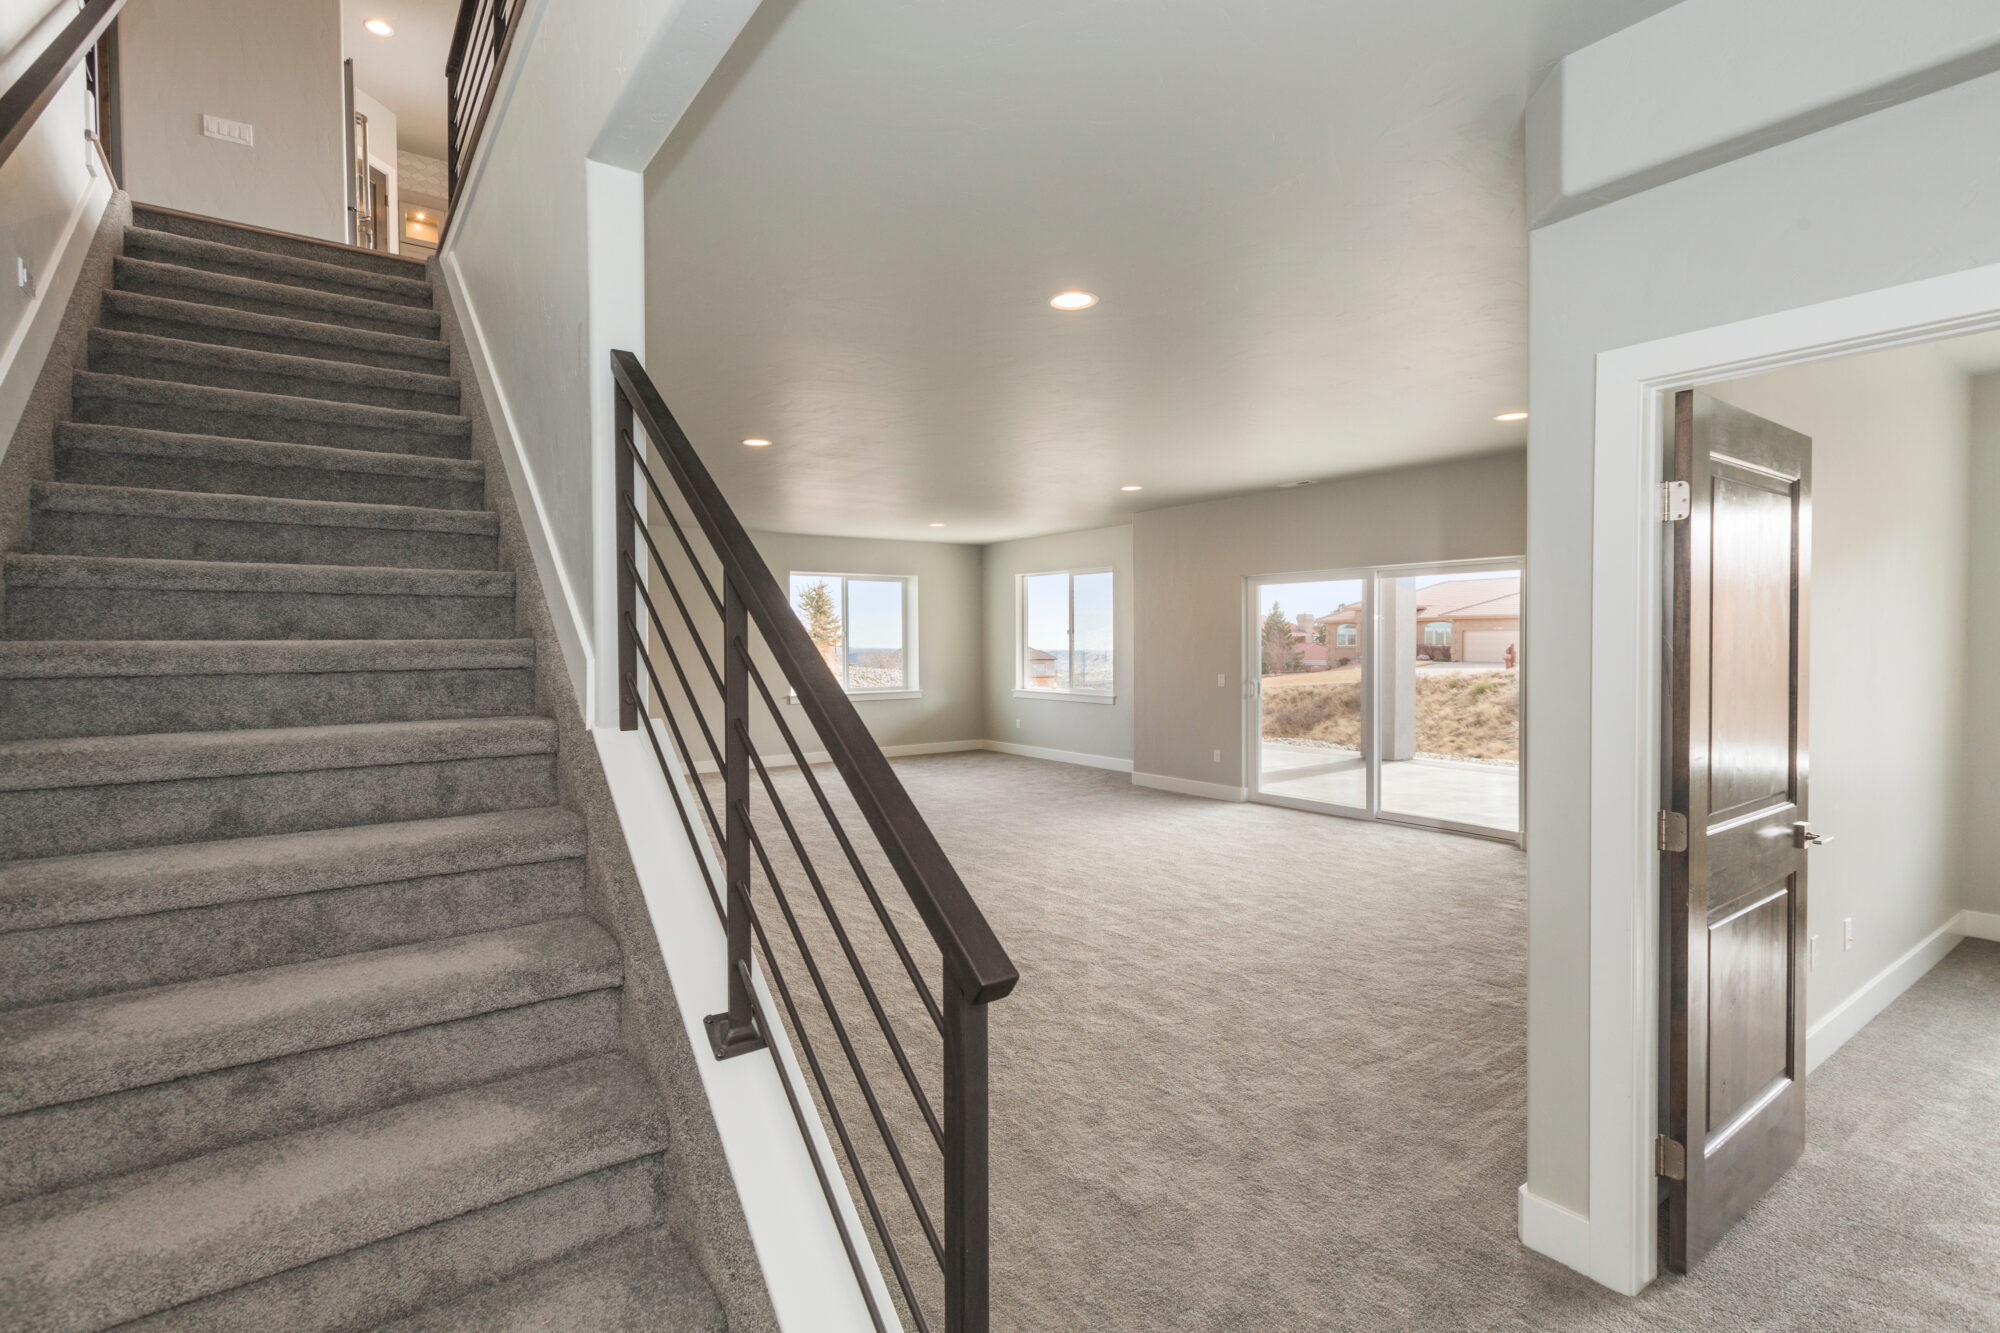 Can a Basement Remodel Add Value to Your Home?